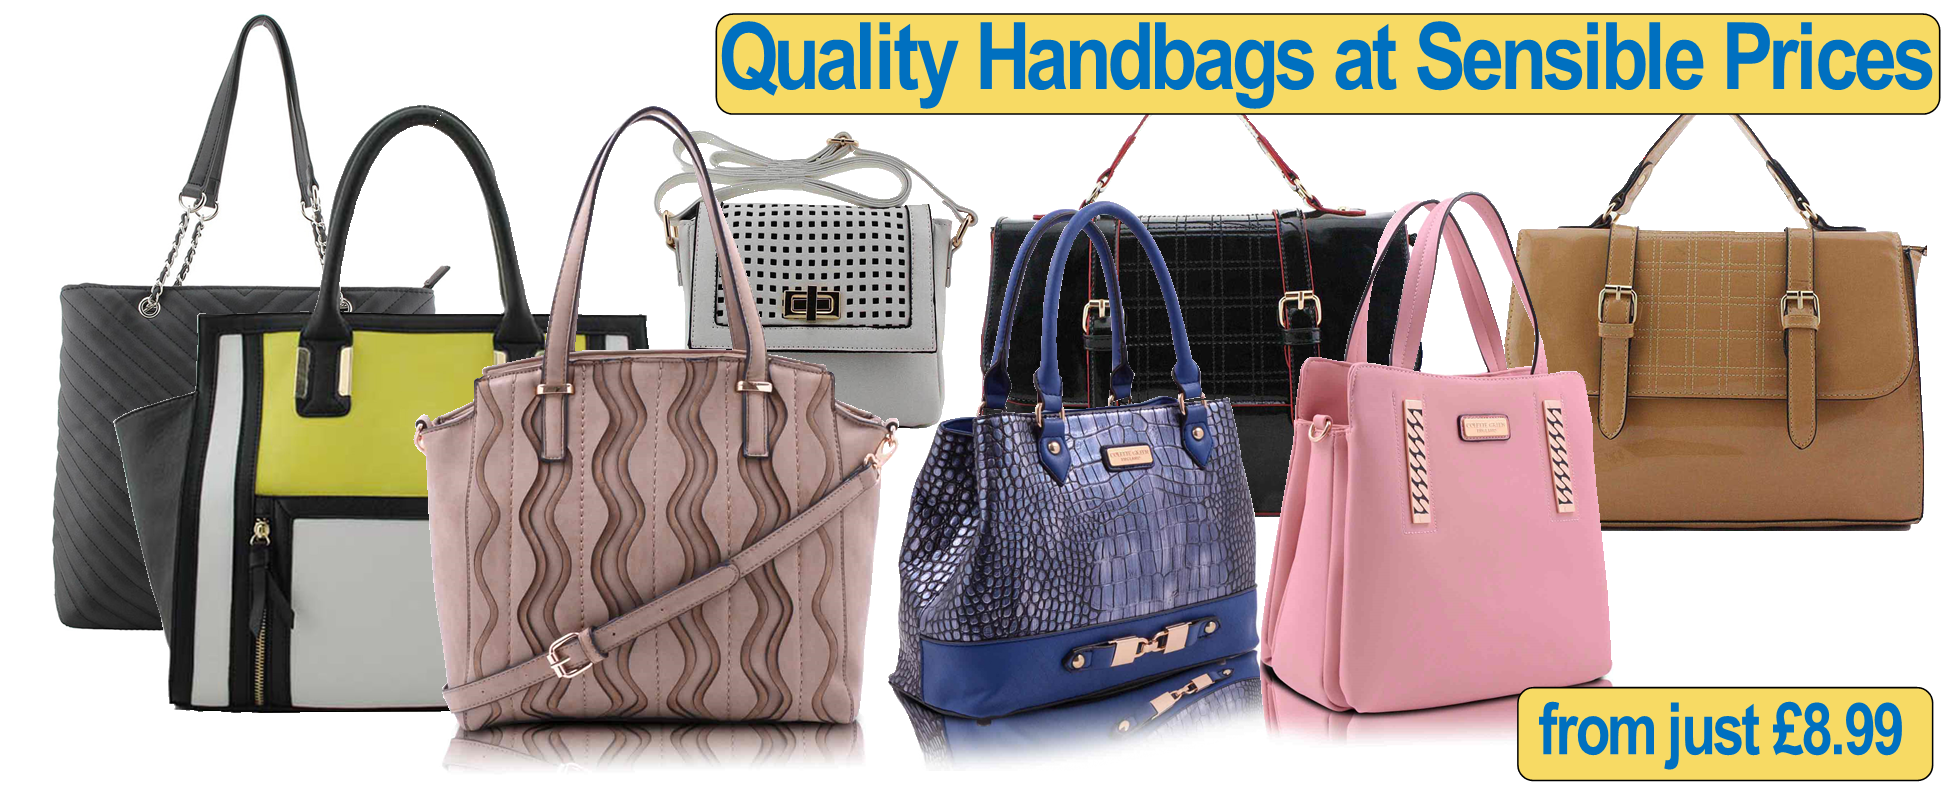 Shopping Deals on Quality Handbags at Sensible Prices